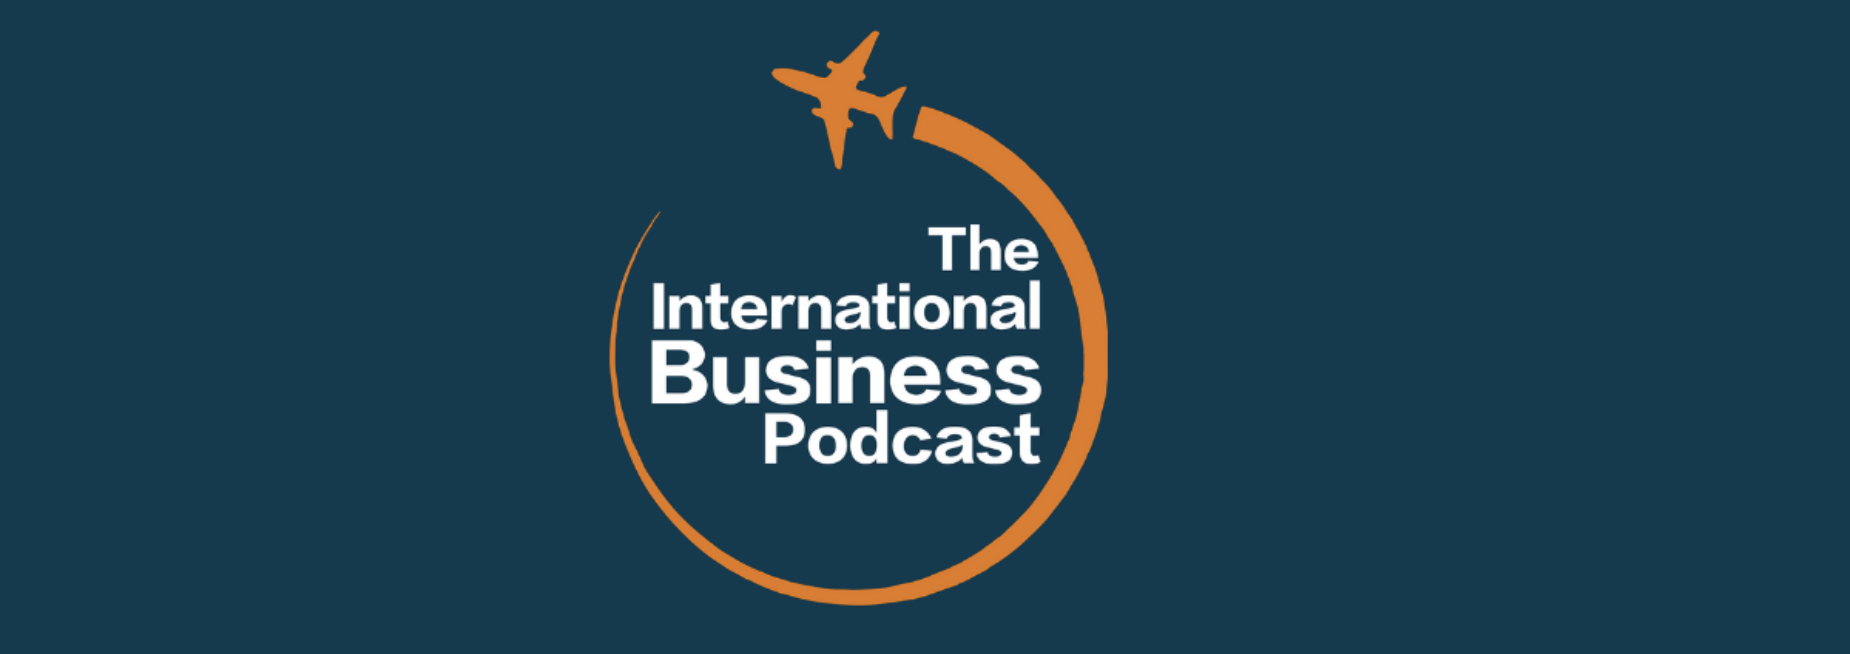 The international business podcast